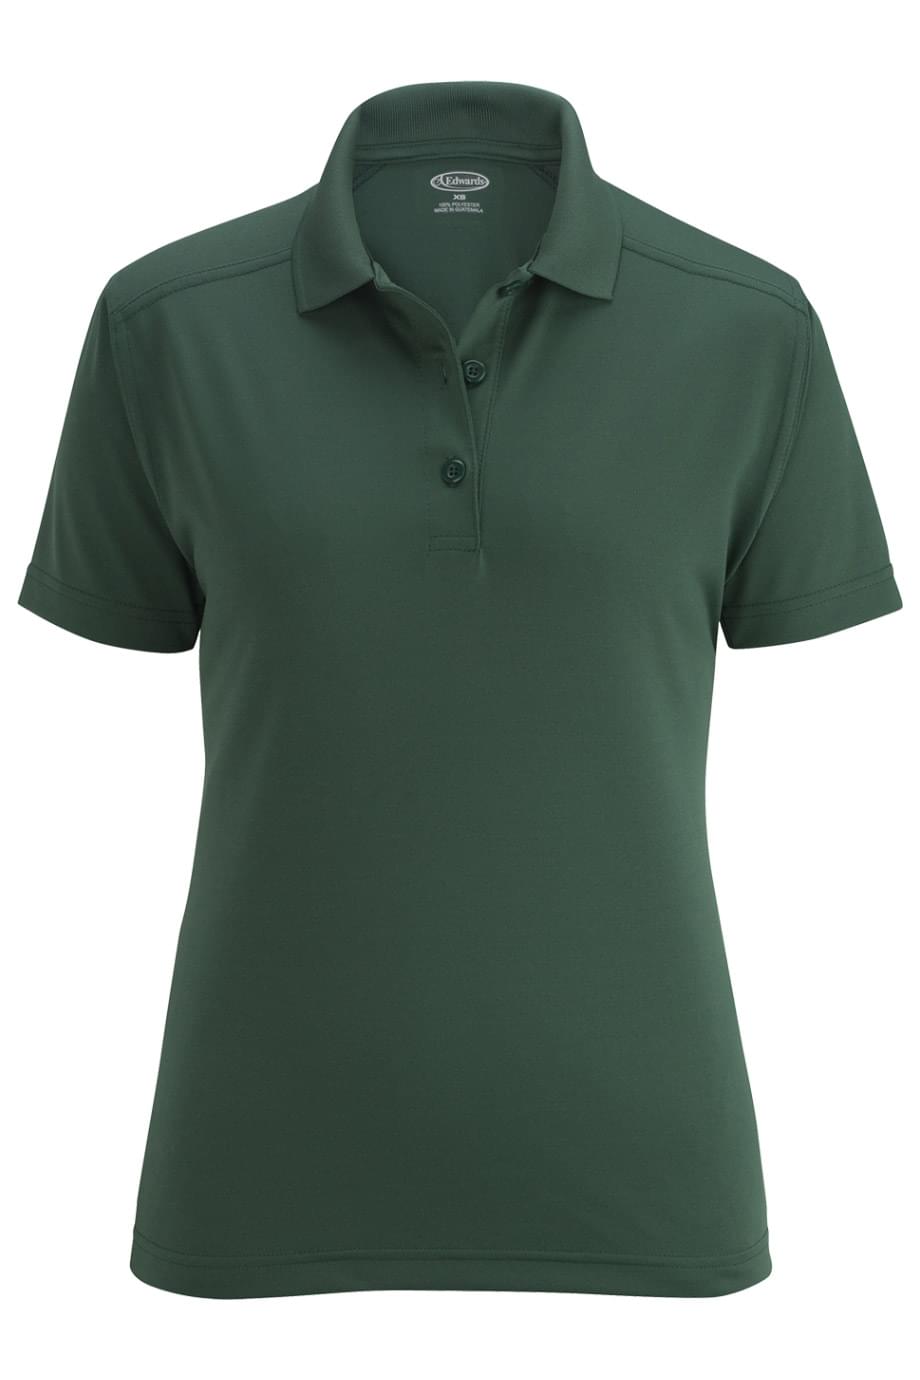 Edwards Snag-Proof Polo 5512 for Women Fern